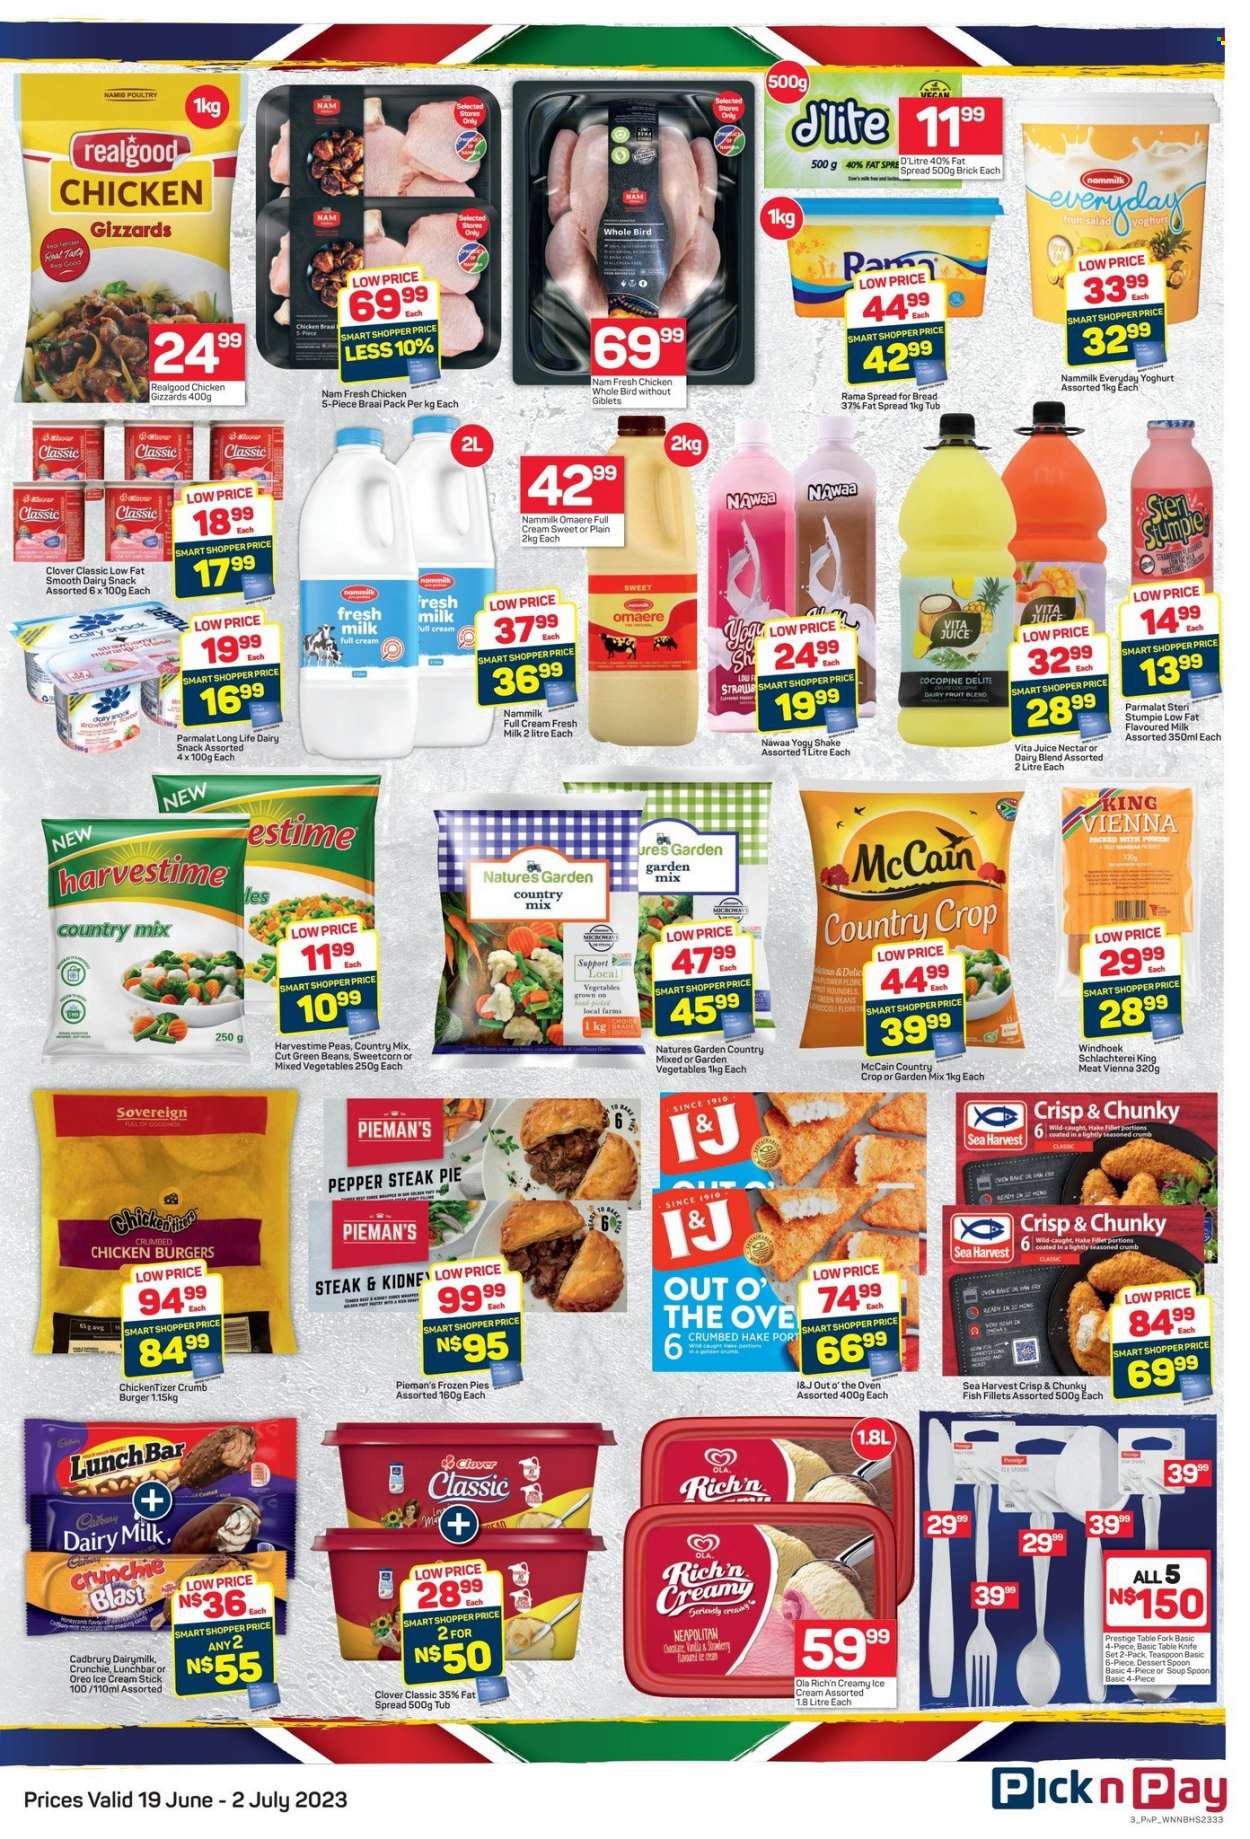 Pick n Pay catalogue  - 19/06/2023 - 02/07/2023 - Sales products - bread, pie, Piemans, dessert, beans, broccoli, green beans, mixed vegetables, snack, salad, fish fillets, hake, fish, Sea Harvest, hake fillet, soup, hamburger, Out o' the Oven, Oreo, Parmalat, flavoured milk, Steri Stumpie, dairy blend, shake, fat spread, Rama, ice cream, Ola, Natures Garden, Harvestime, McCain, frozen pies, Cadbury, Dairy Milk, fruit salad, juice, whole chicken, chicken gizzards, chicken, steak, table. Page 3.